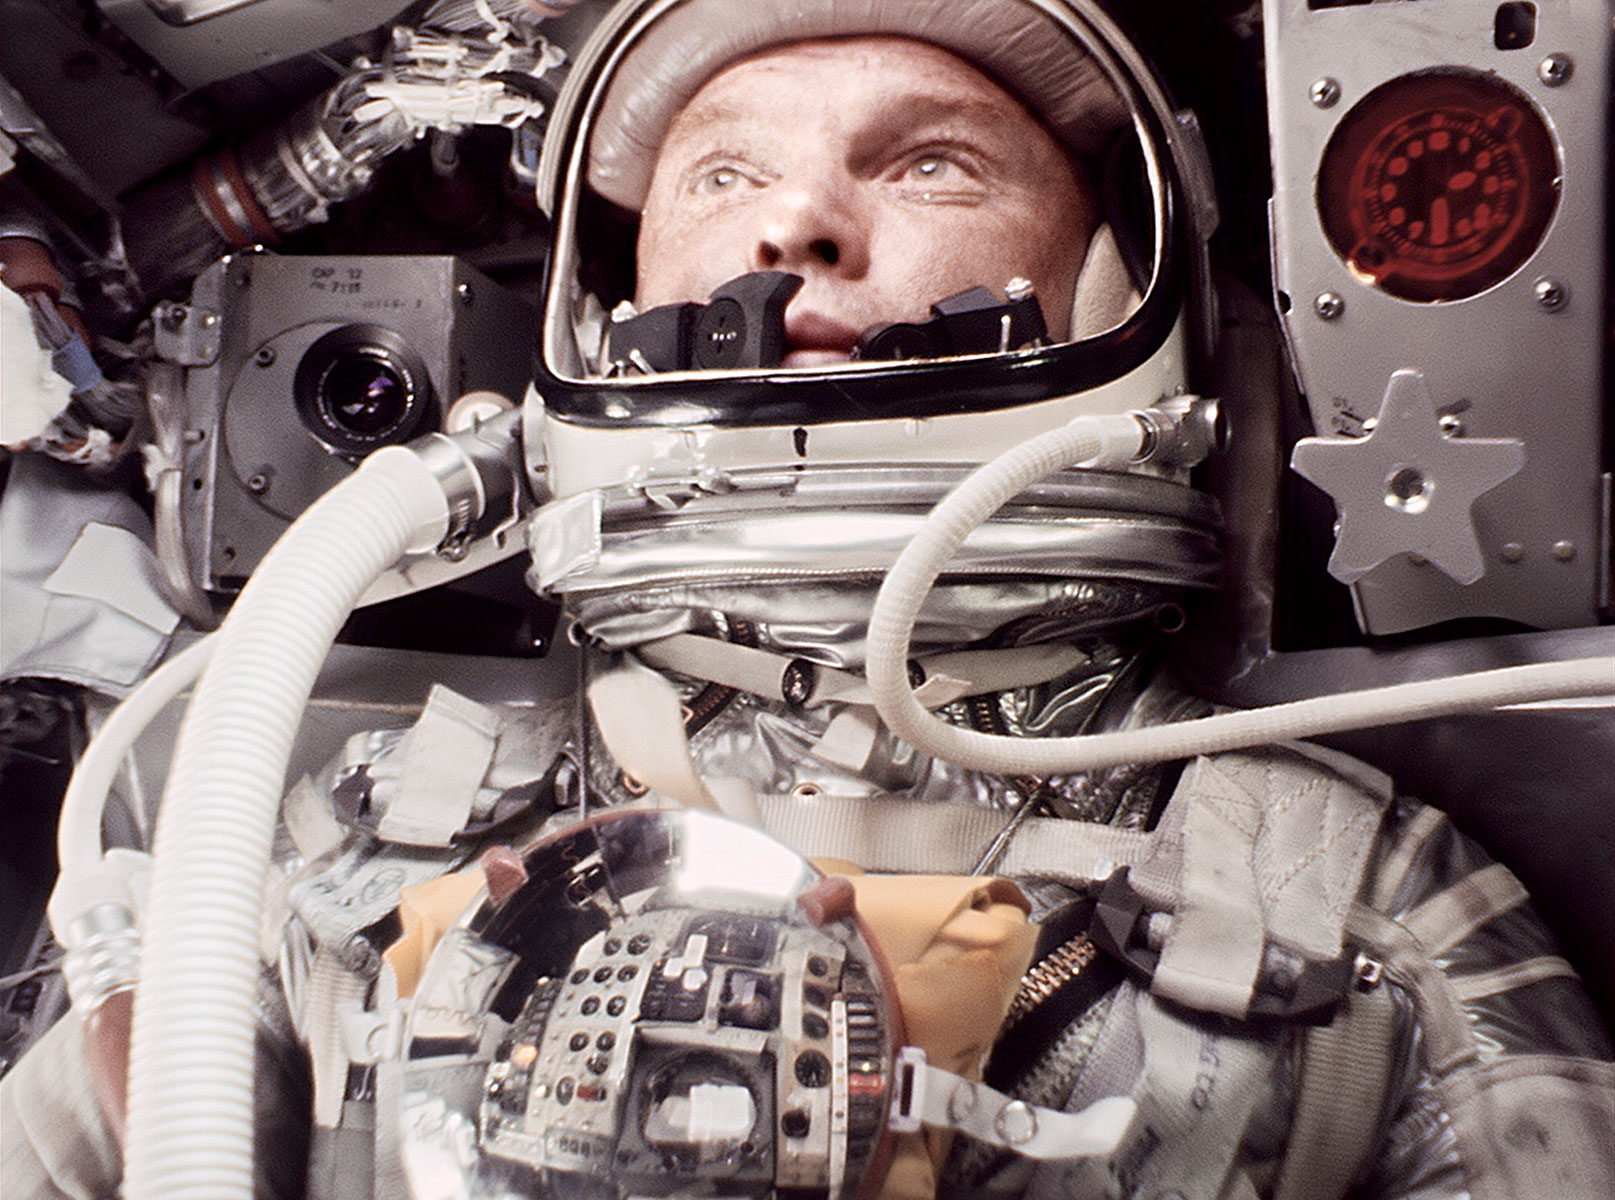 John Glenn in Earth orbit, as never seen before. Newly remastered imagery for the 60th anniversary utilized more than 1,000 image samples to reveal details on Glenn's spacesuit and reflected in his chest-mounted mirror.